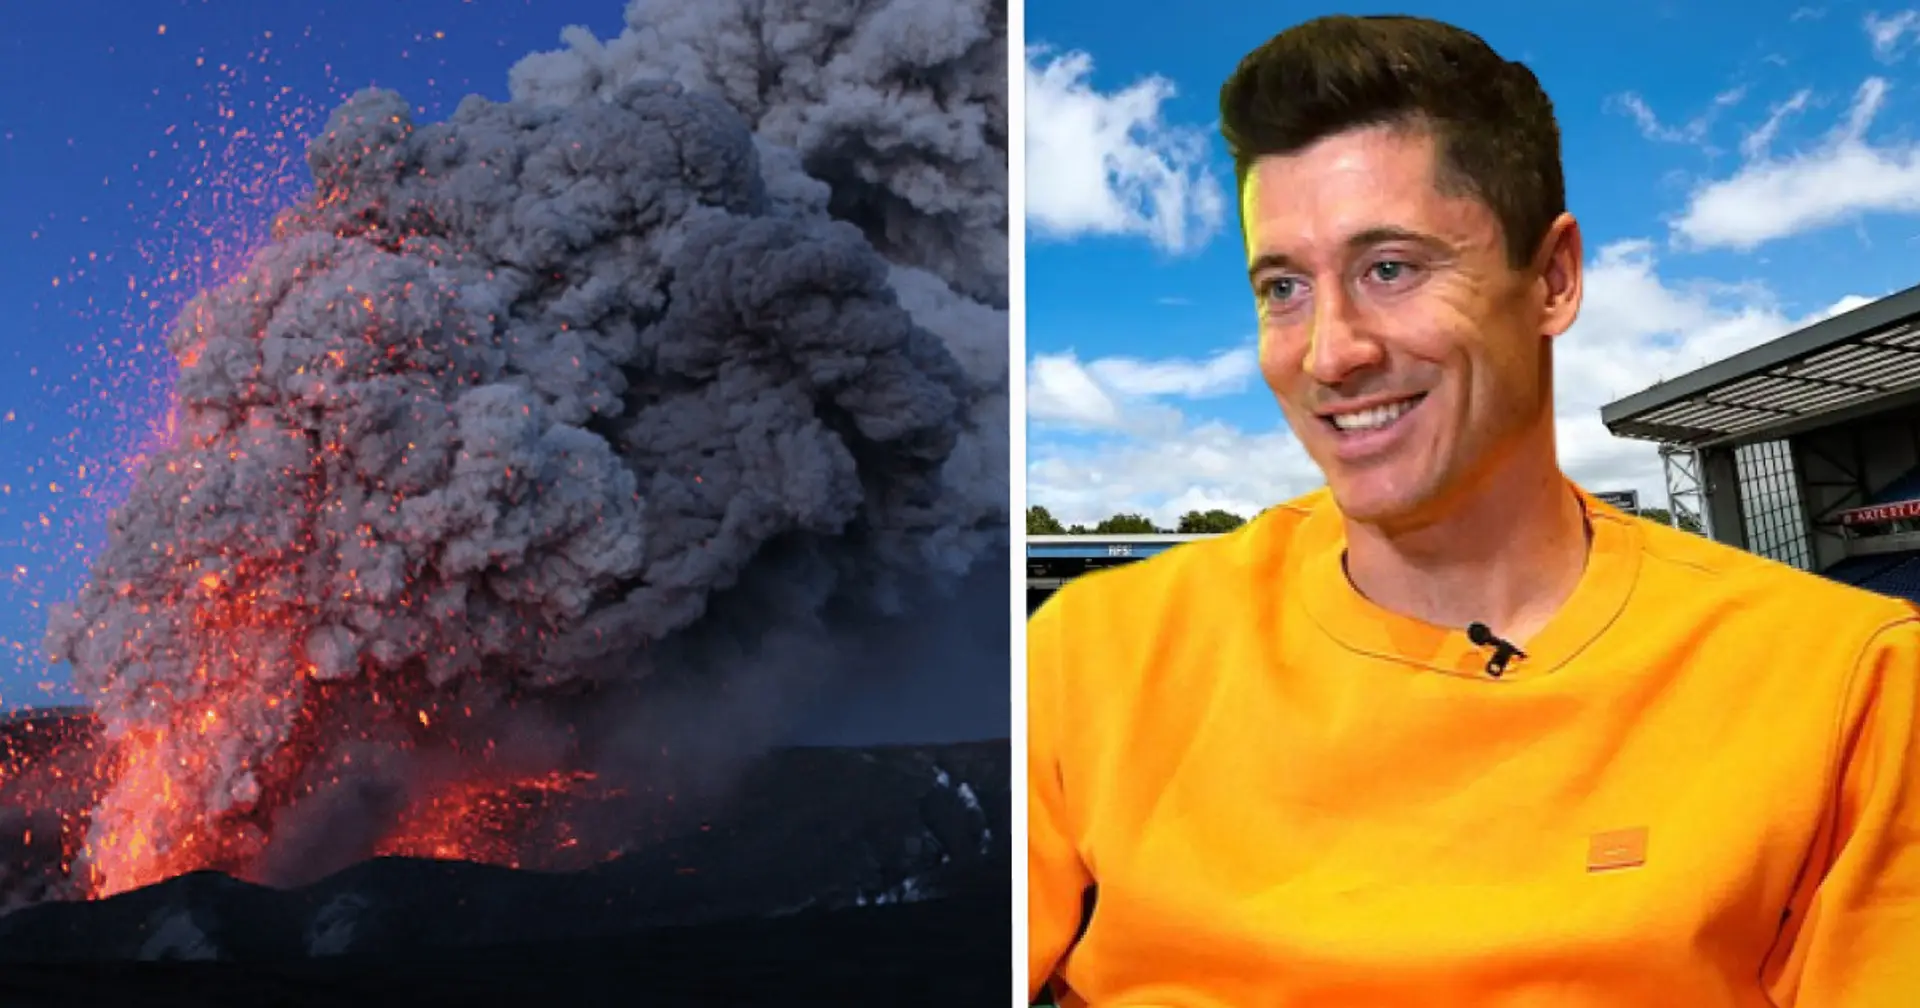 Volcano eruption once stopped Lewandowski transfer to Premier League: 'If I had gone there, it would've been nice'